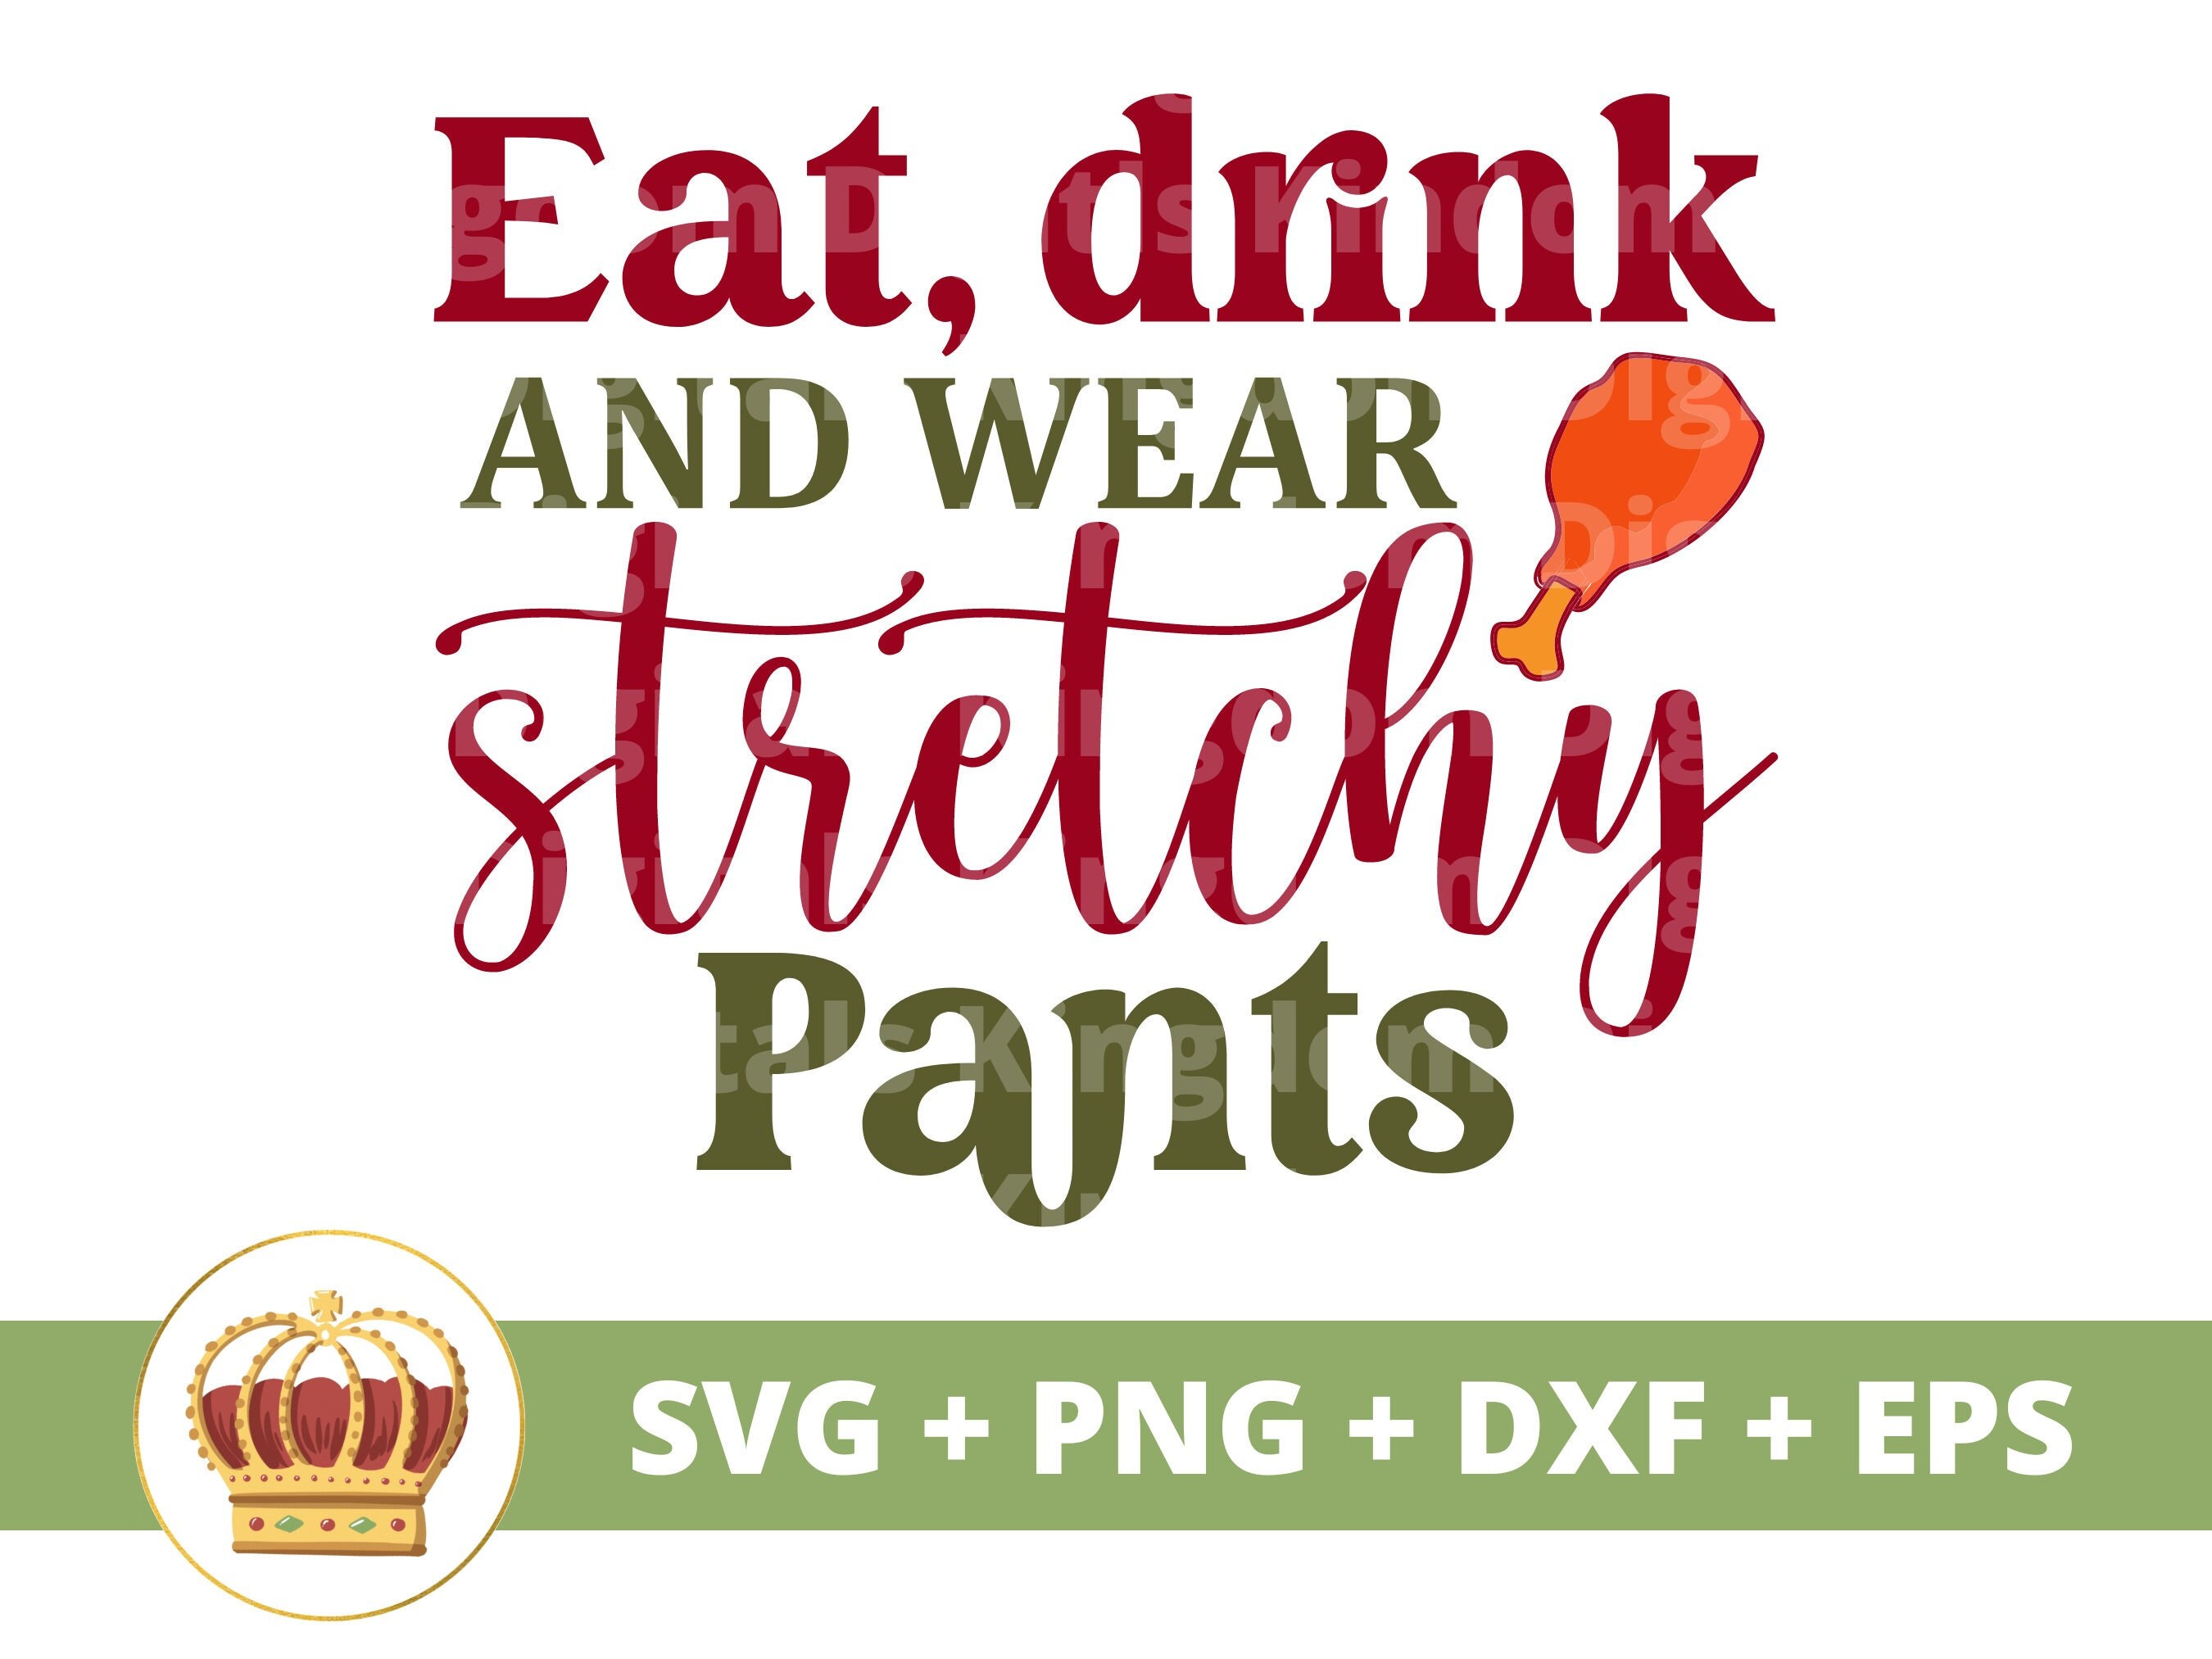 Eat Drink and Wear Stretch Pants